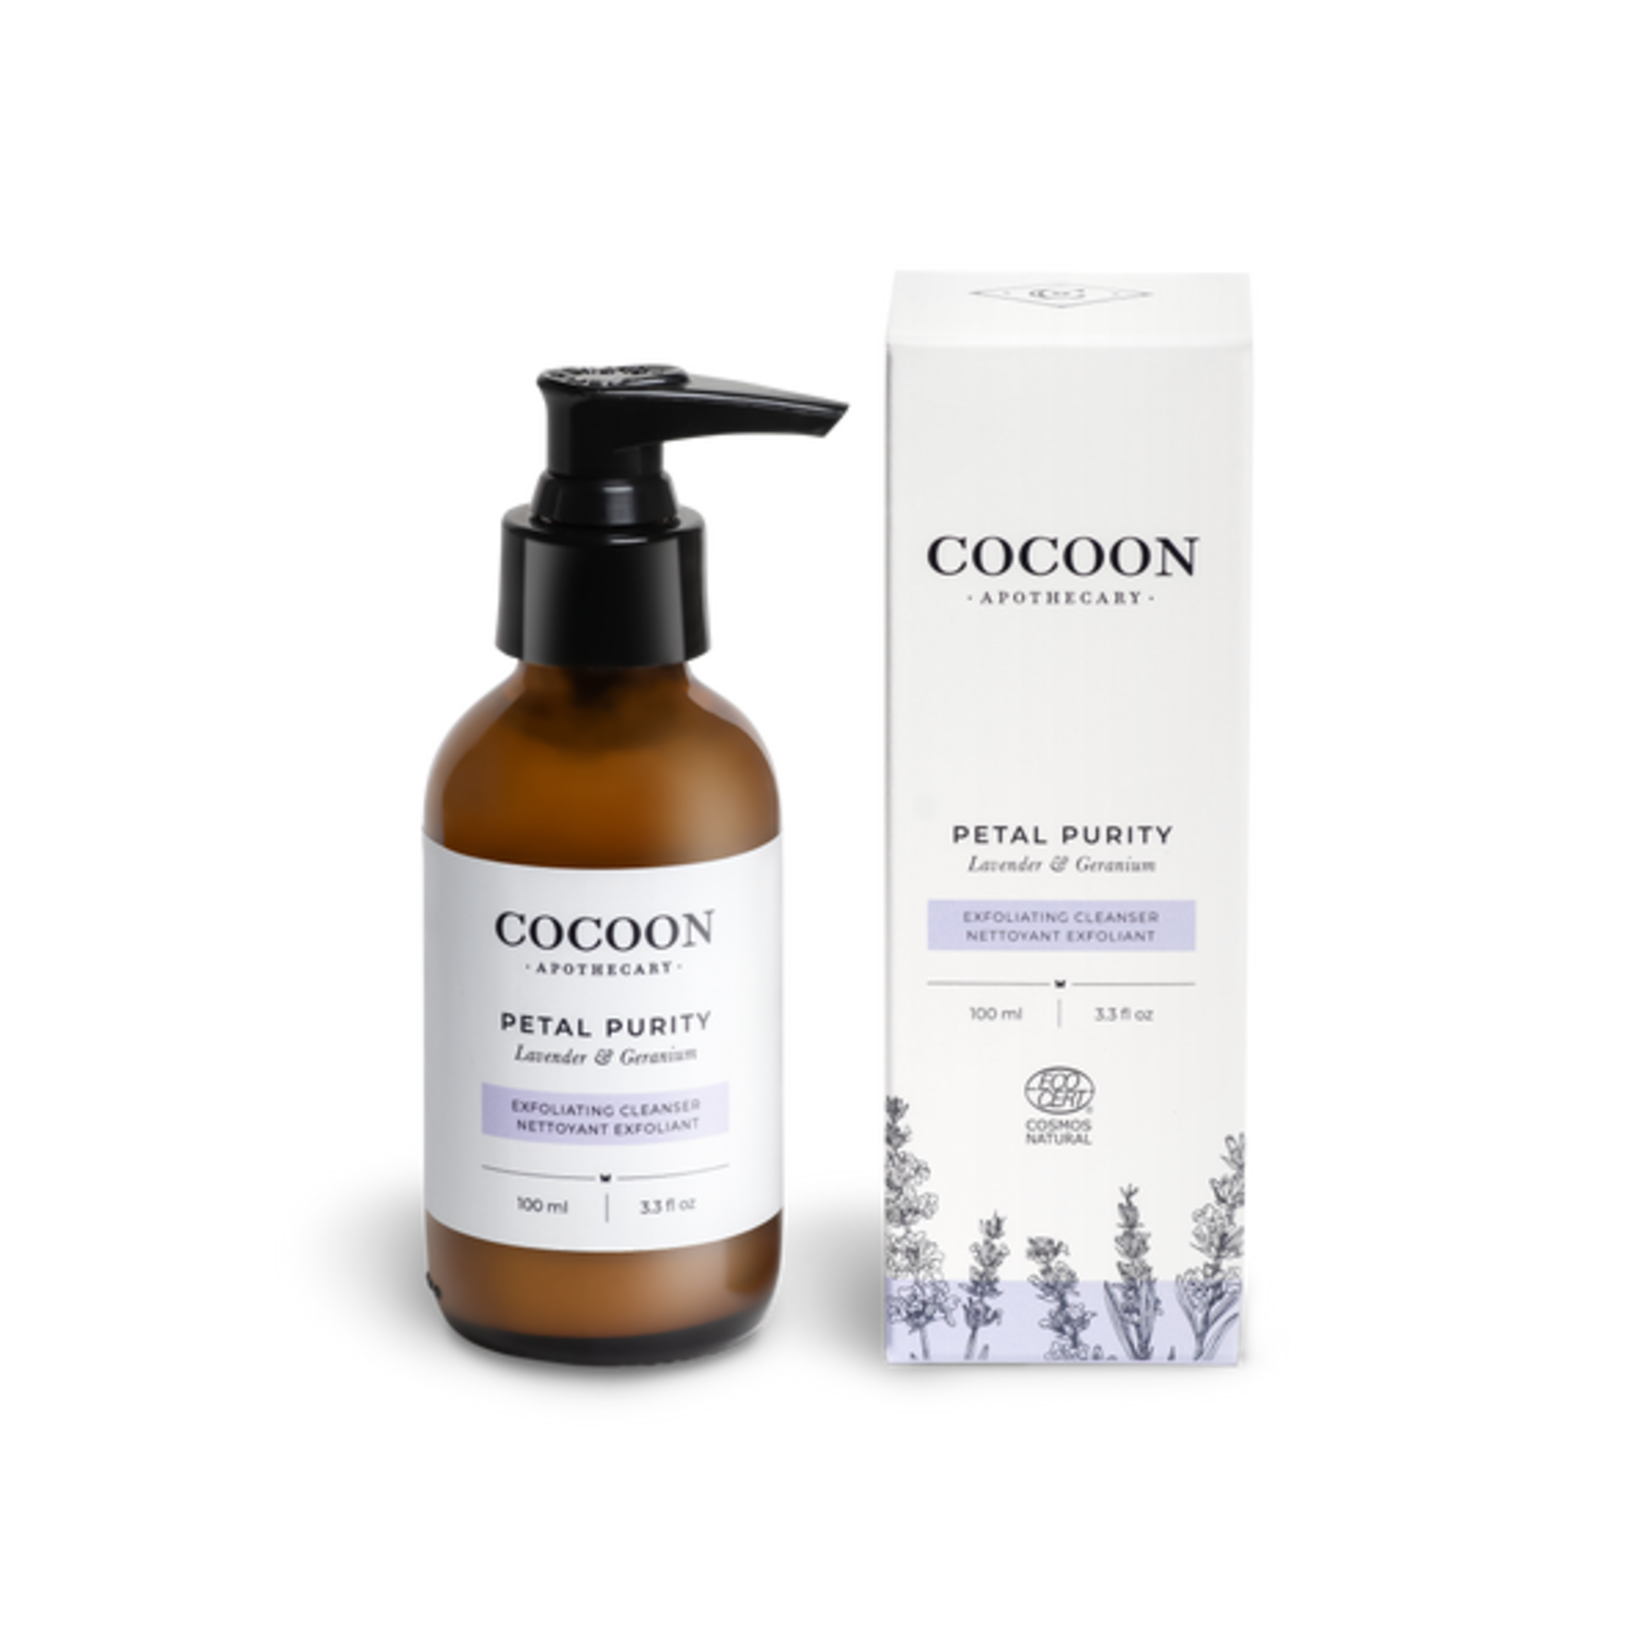 Cocoon Petal Purity Exfoliant Facial Cleanser